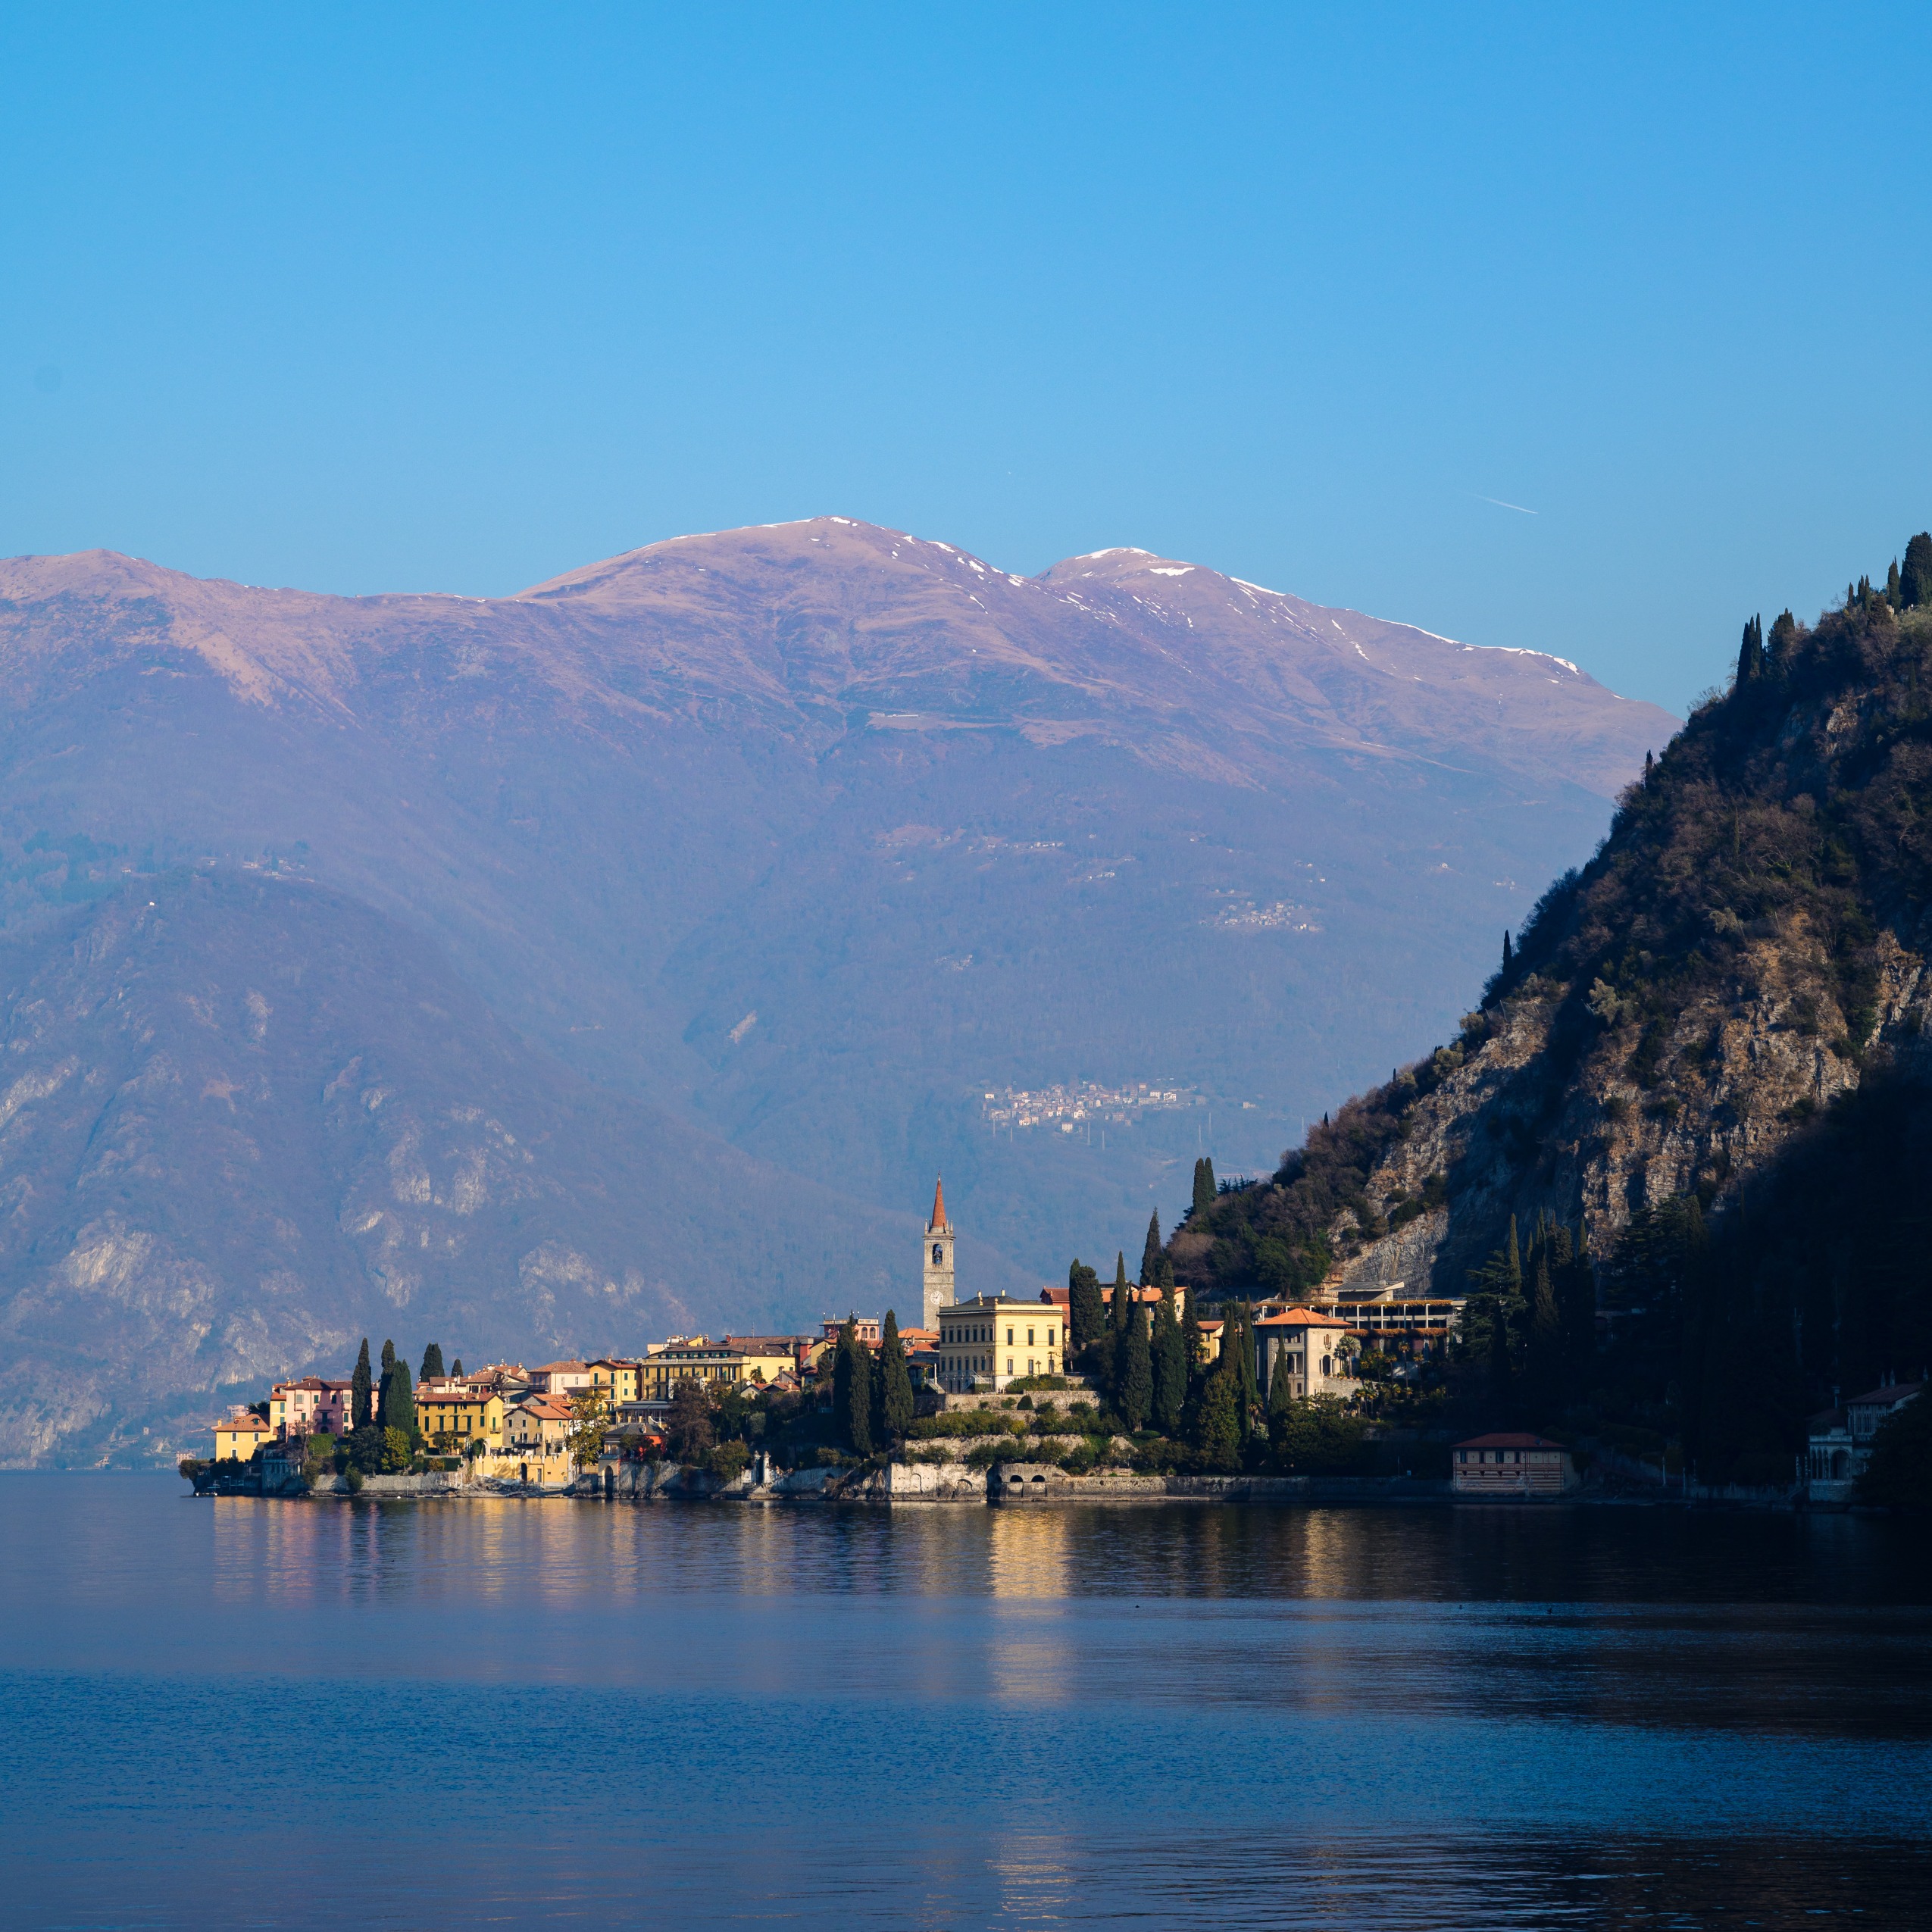 You Can Find Some of the Best Views of Lake Como at This Historic Hotel